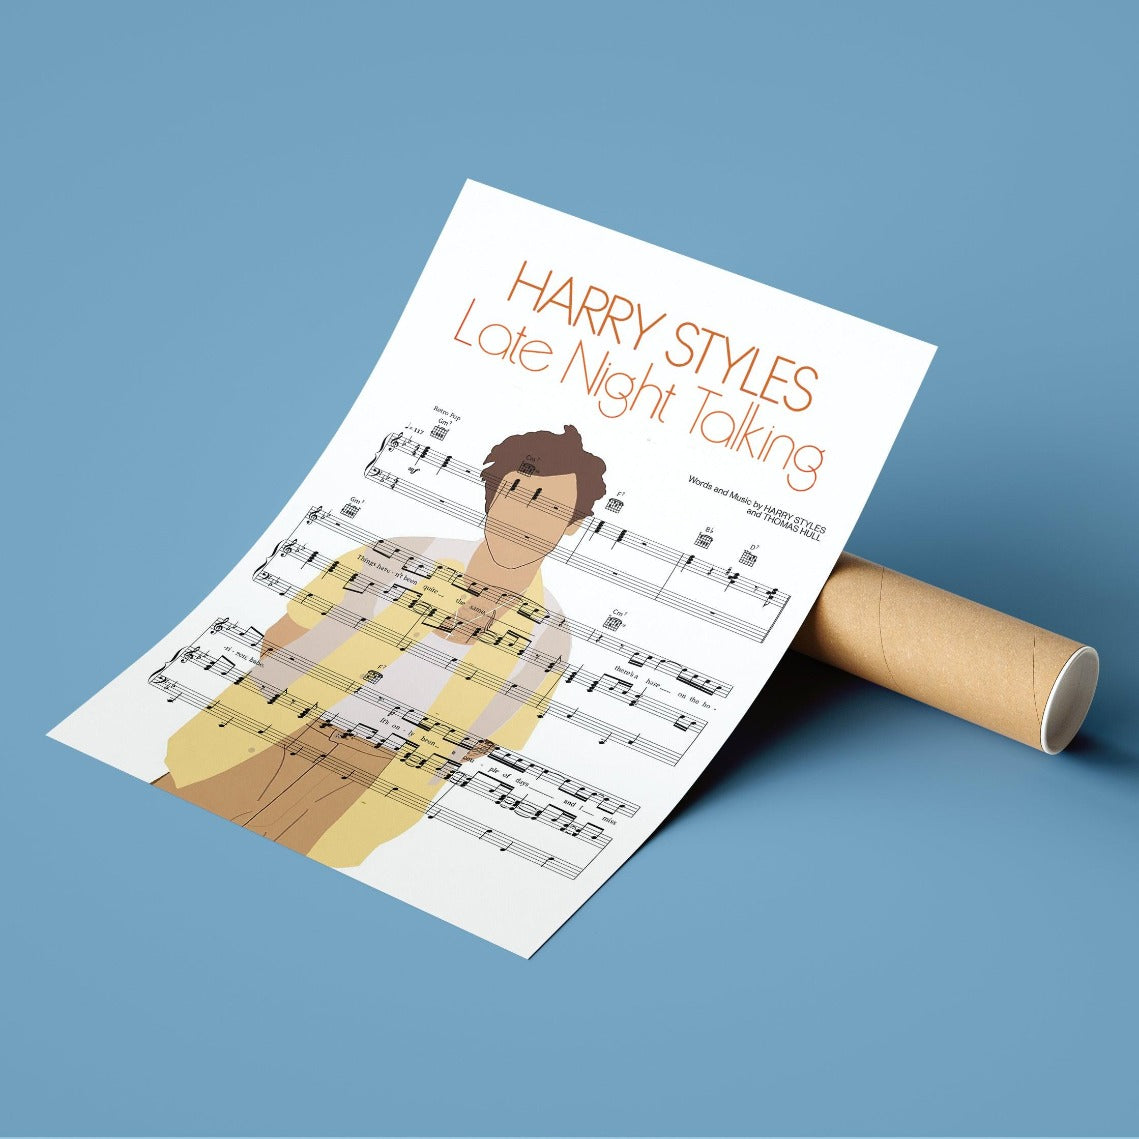 Add a touch of musical flair to your walls with this stunning Harry Styles Late Night Talking Poster. Featuring iconic song lyrics, this beautiful print is sure to bring some joy and inspiration to any music or art lover. With its vibrant design and timeless words, it will definitely become the focal point of any room you decide to hang it in. Whether you give it as a gift or keep it for yourself, this Harry Styles Late Night Talking Poster will bring with it lots of positive vibes and creative energy.